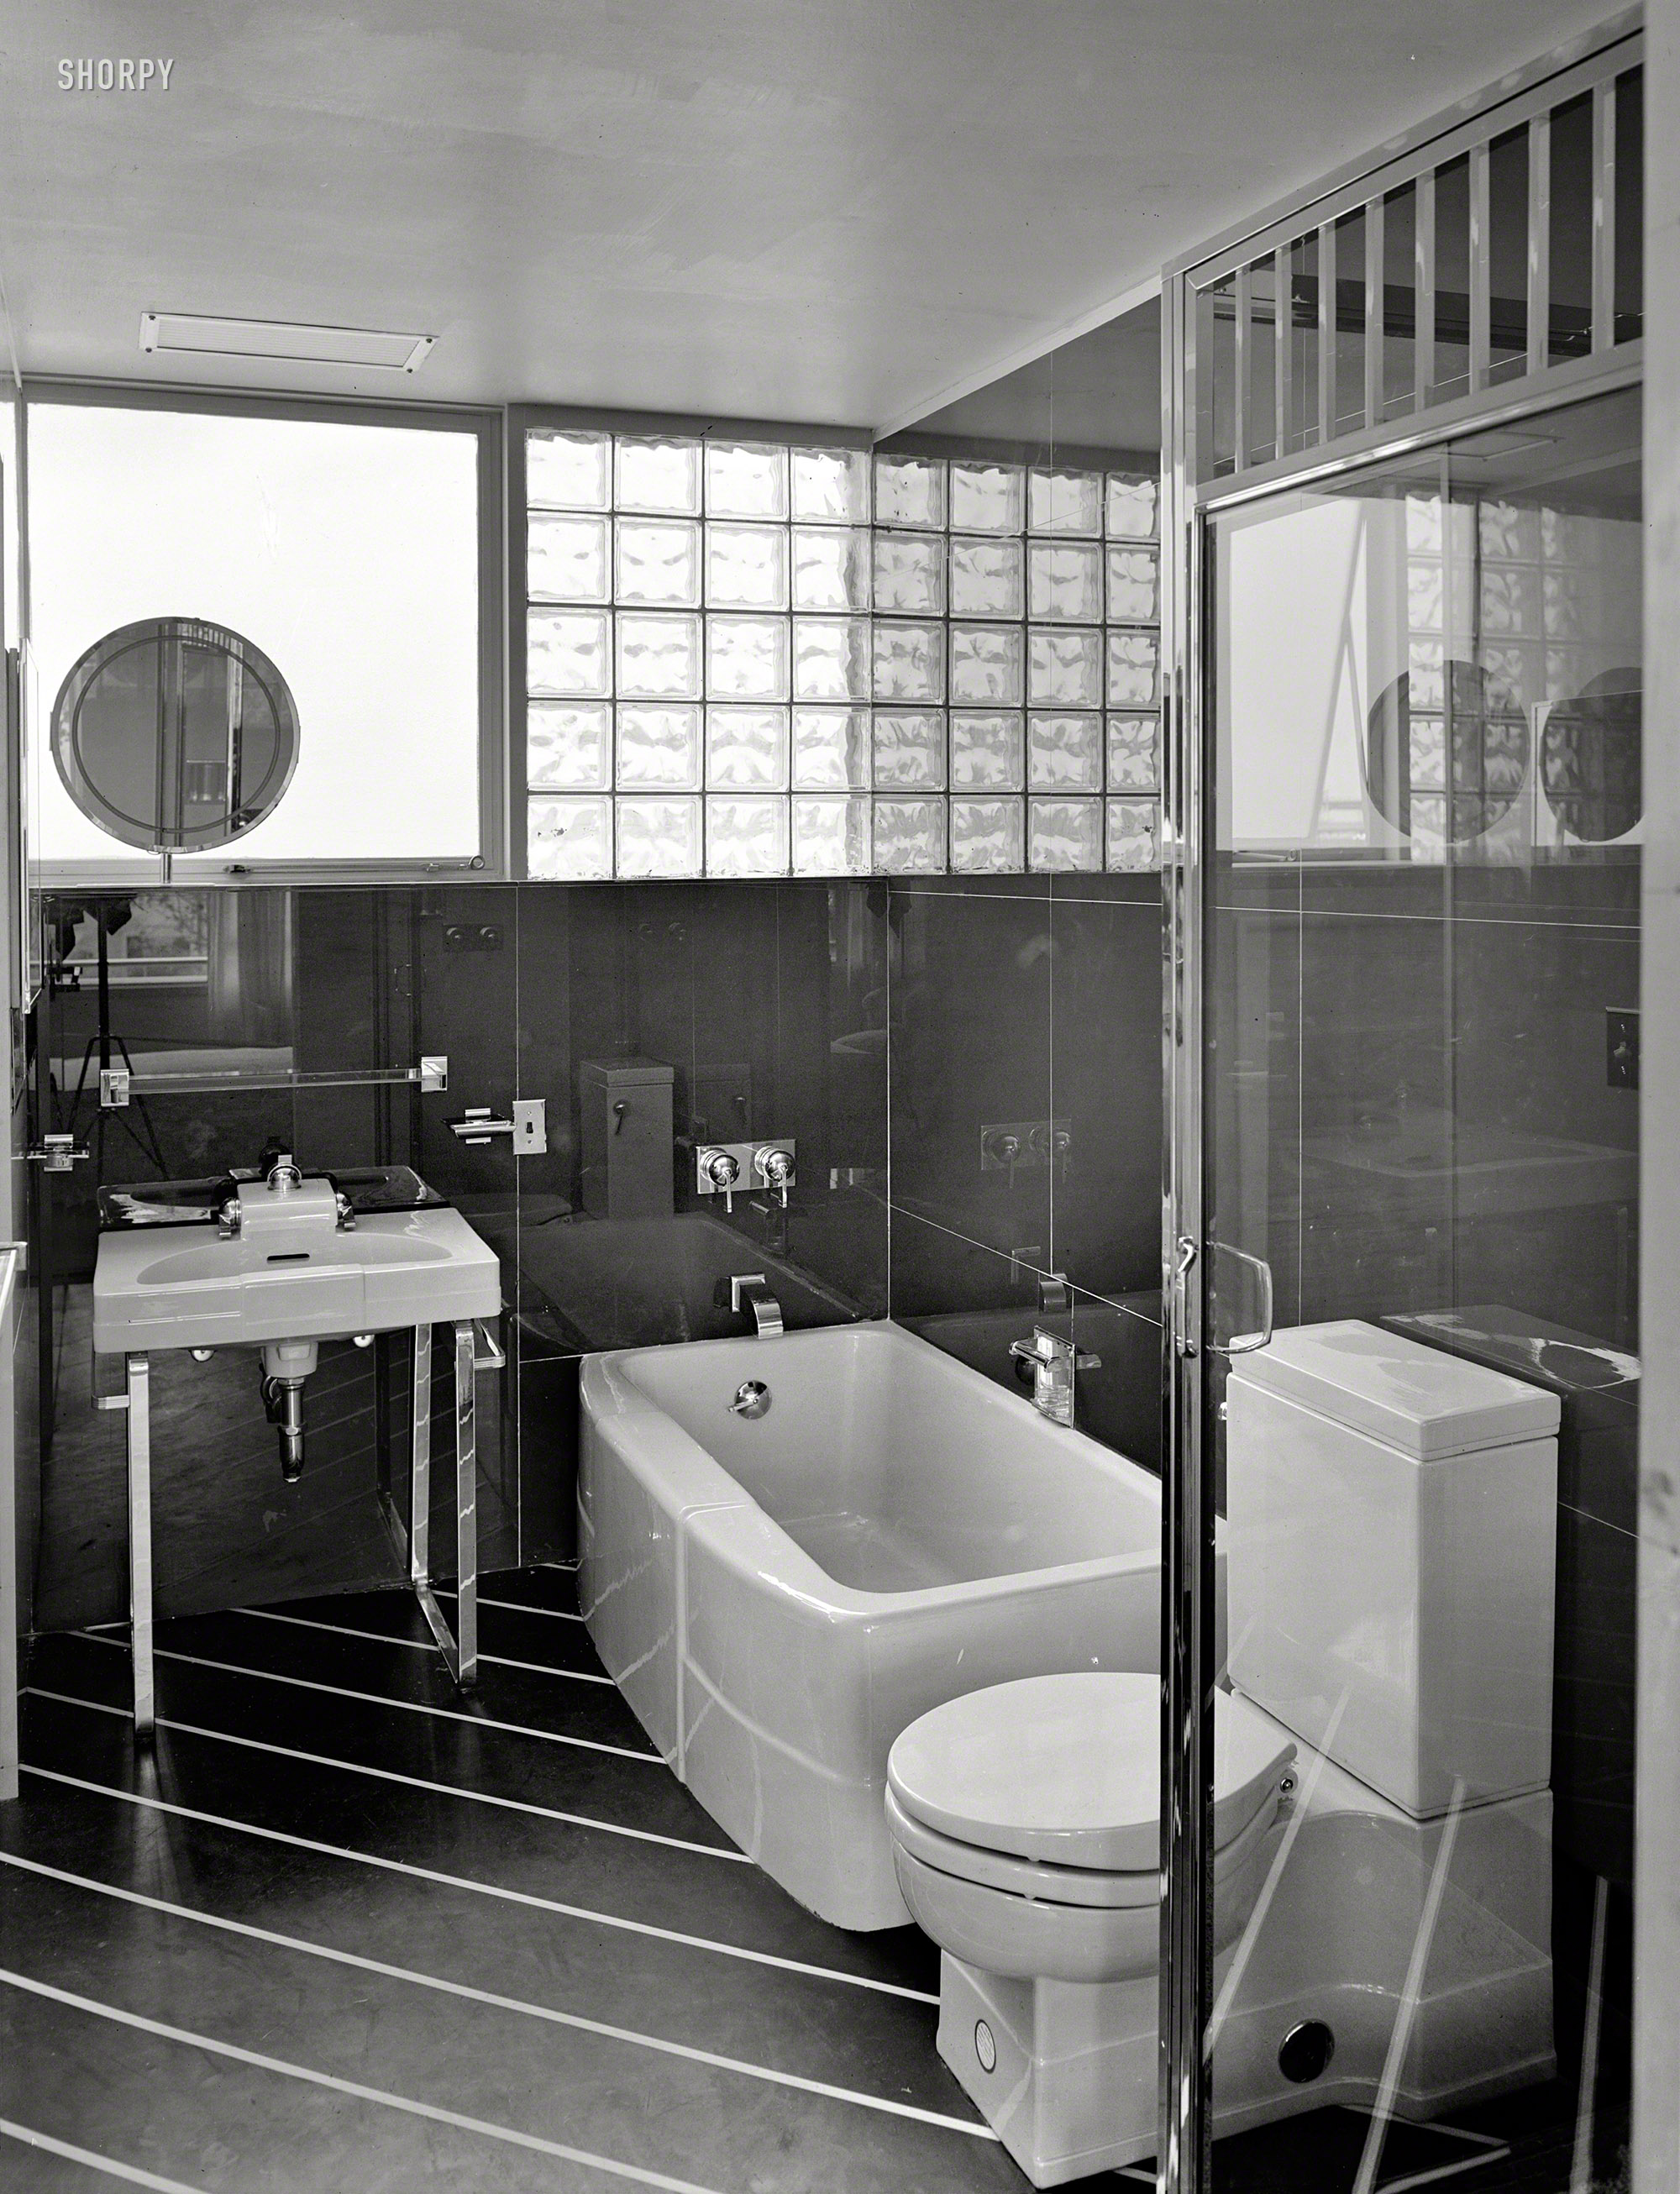 June 12, 1939. "House of Glass No. 4, New York World's Fair. Master bath. Landefeld & Hatch, architect." You know what they say about people in glass bathrooms. Large-format negative by Gottscho-Schleisner. View full size.